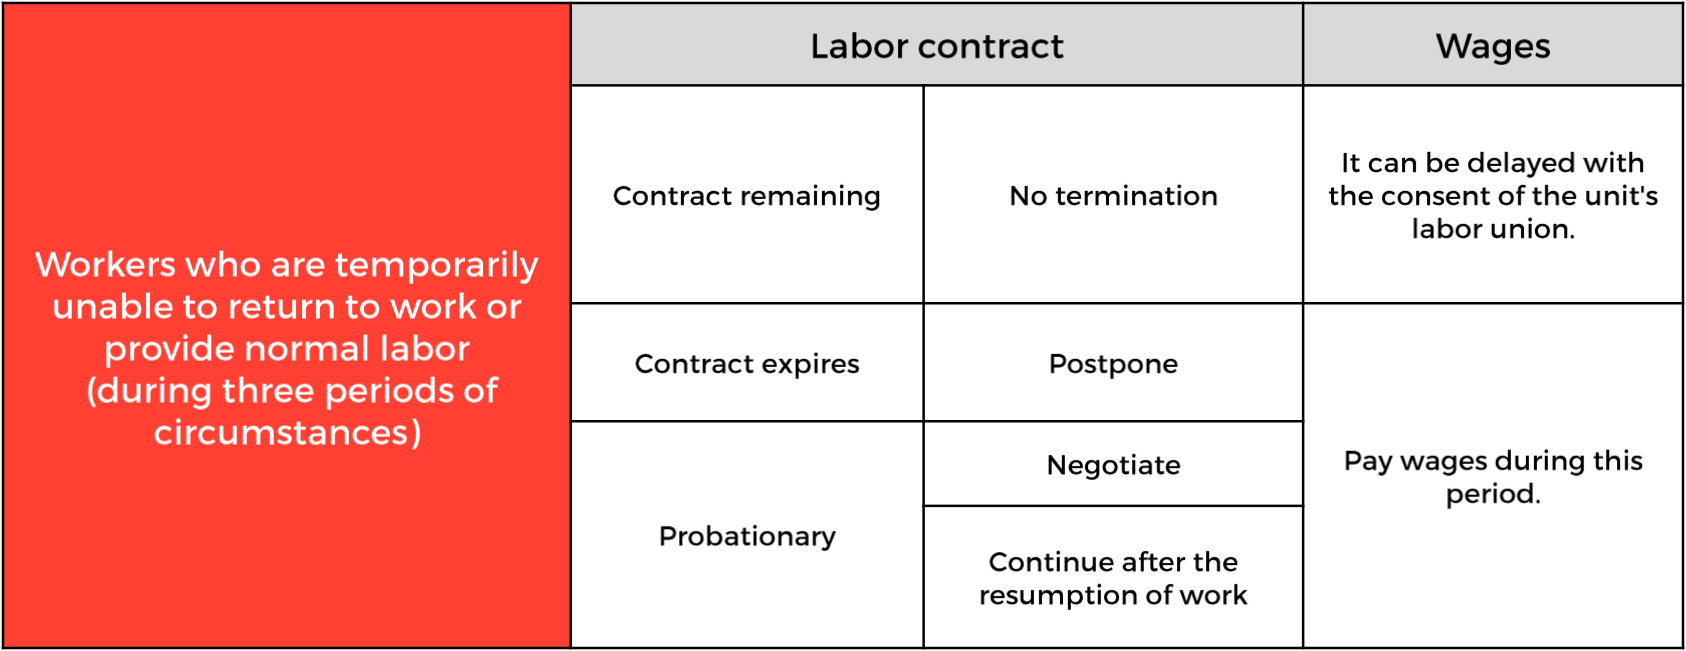 Terms of employee’s contract and wage payment